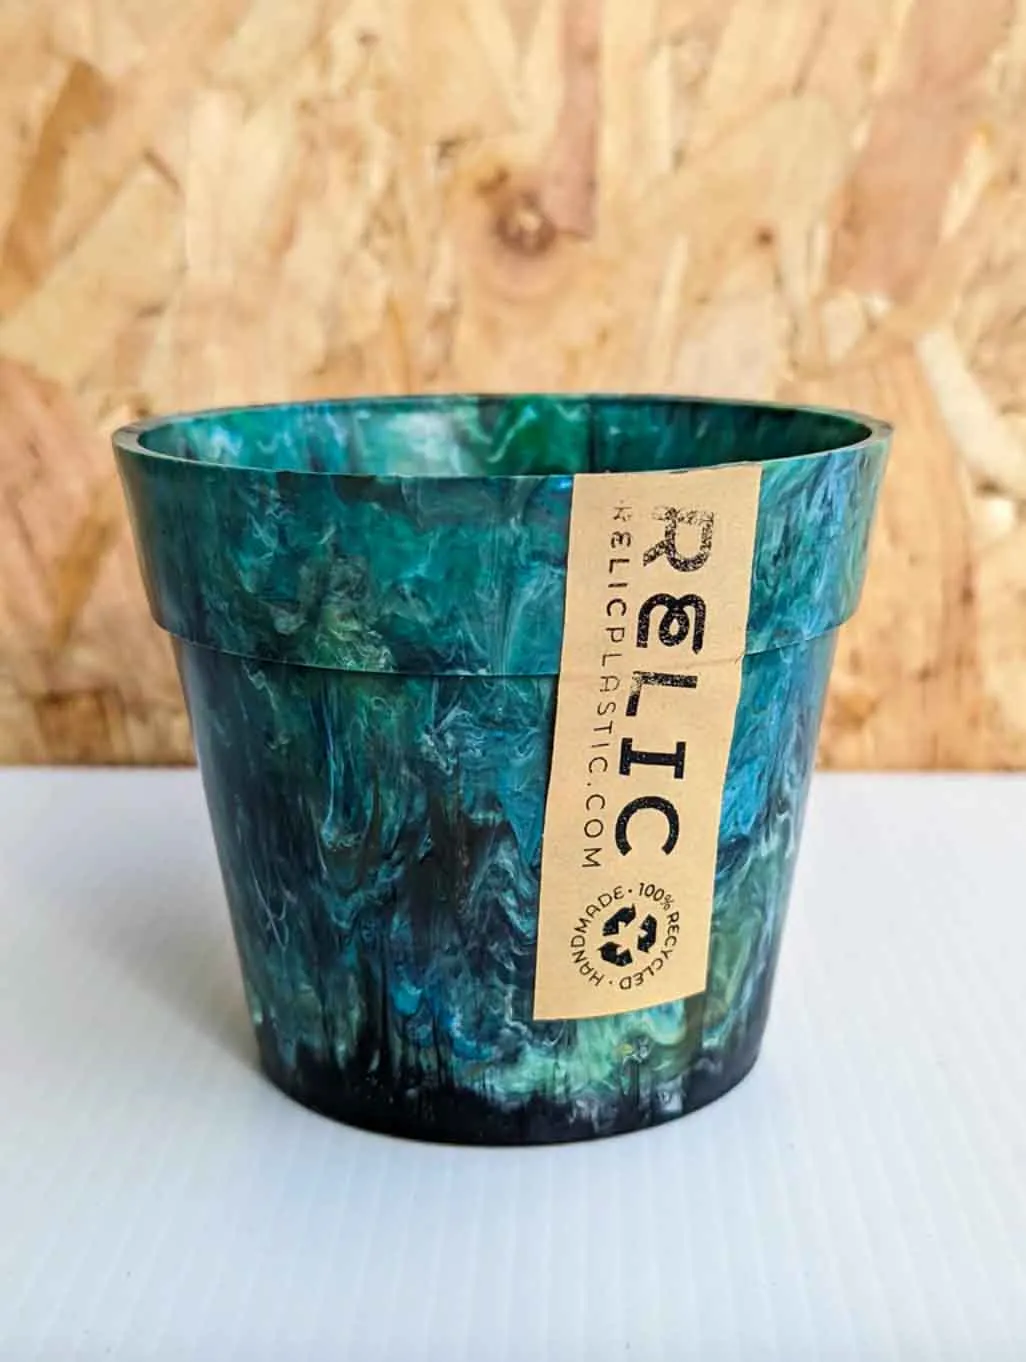 Re-recycled plant pot, £12, The Upcycling Market